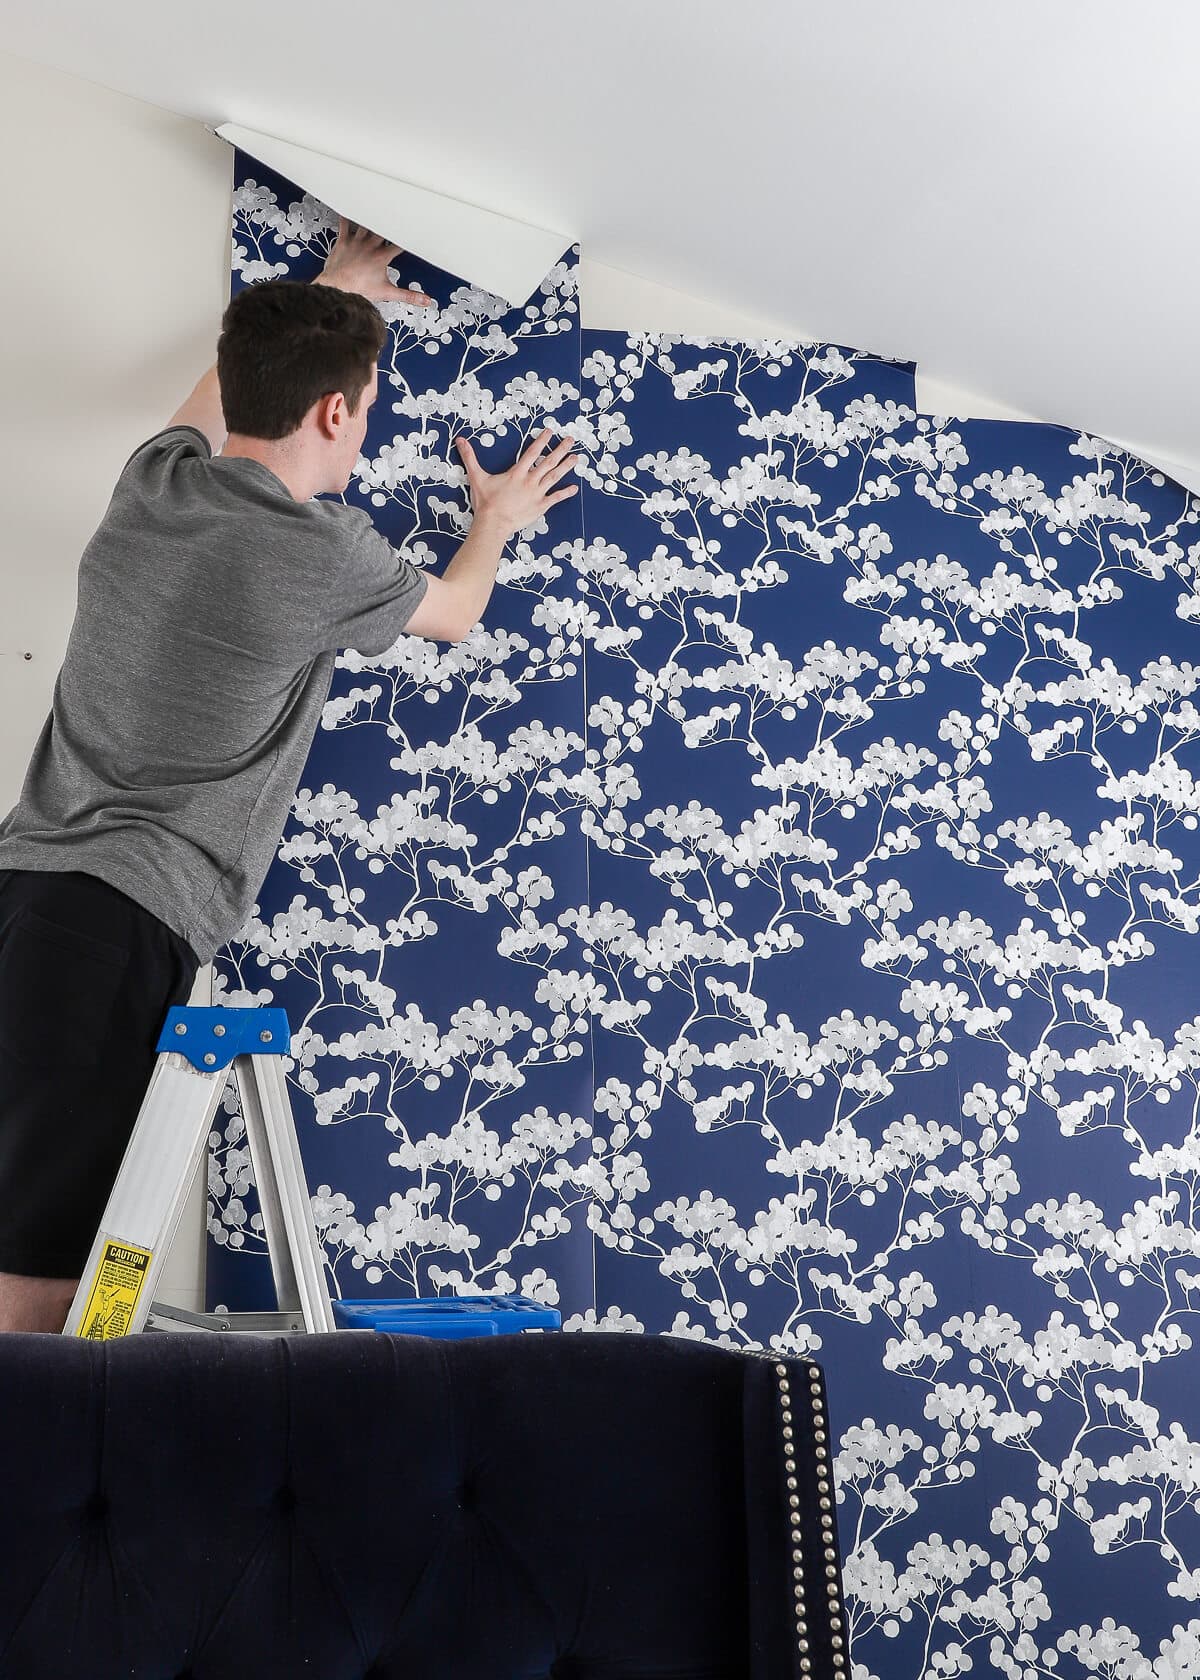 How to Hang Peel and Stick Wallpaper - Driven by Decor